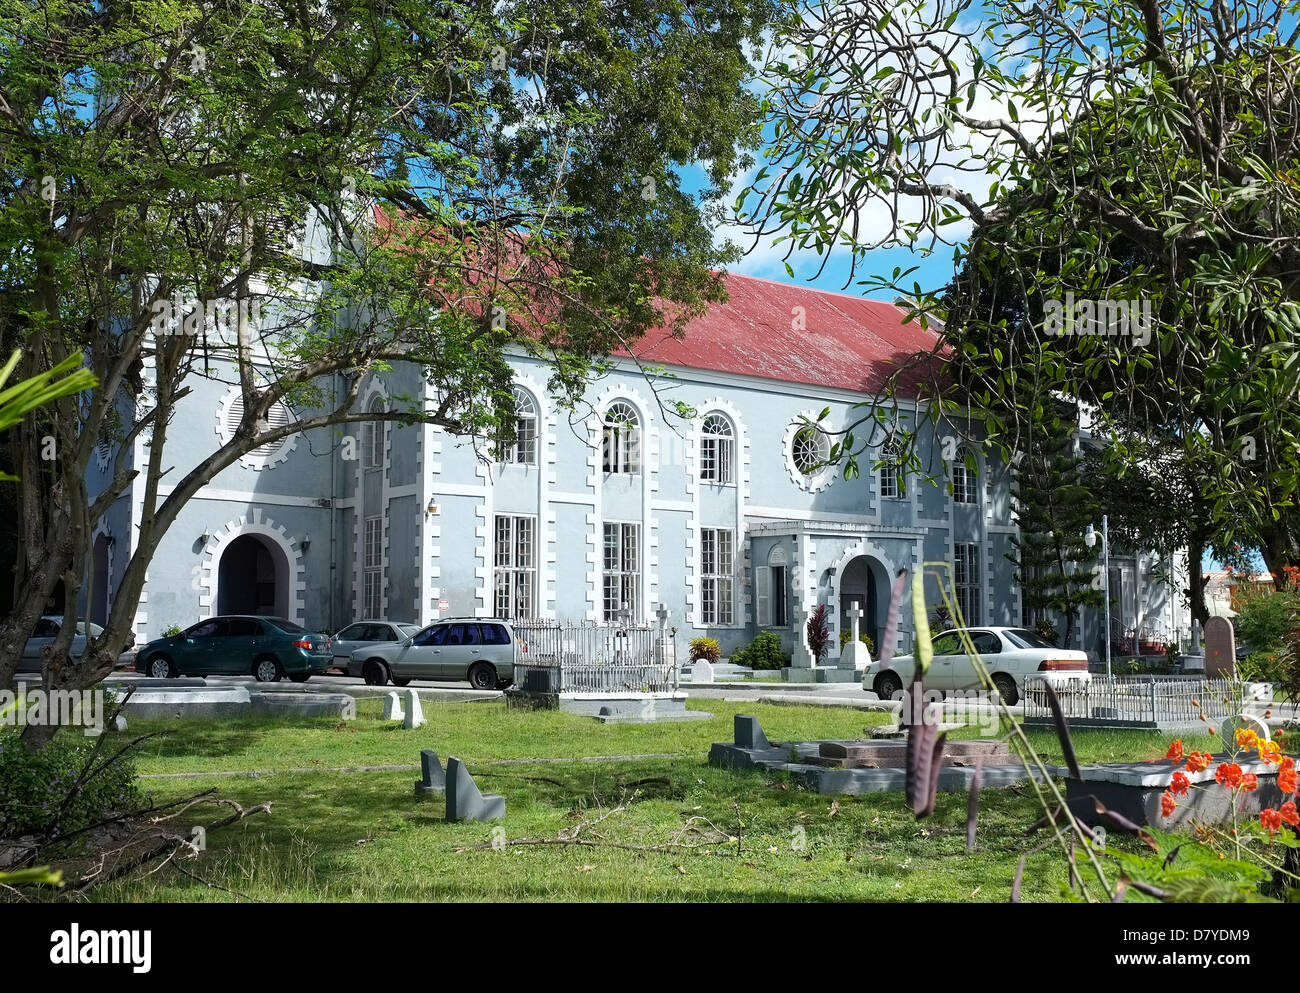 St Mary's Anglican Church, Bridgetown, Barbade Banque D'Images